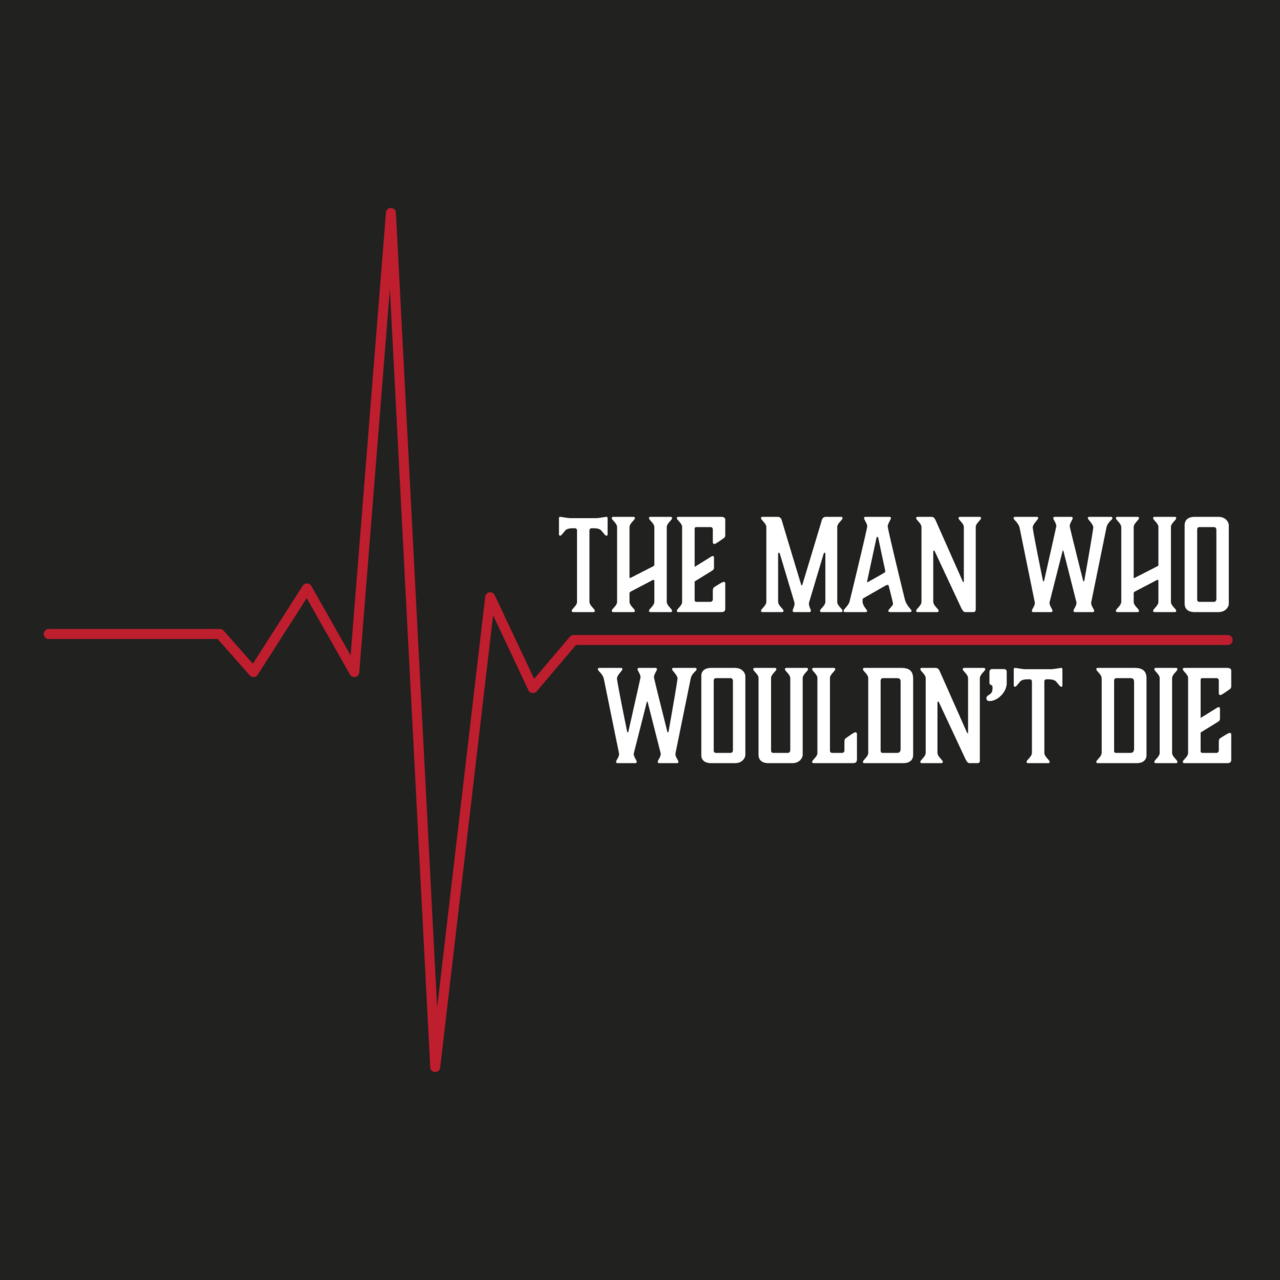 Artwork for The Man Who Wouldn't Die